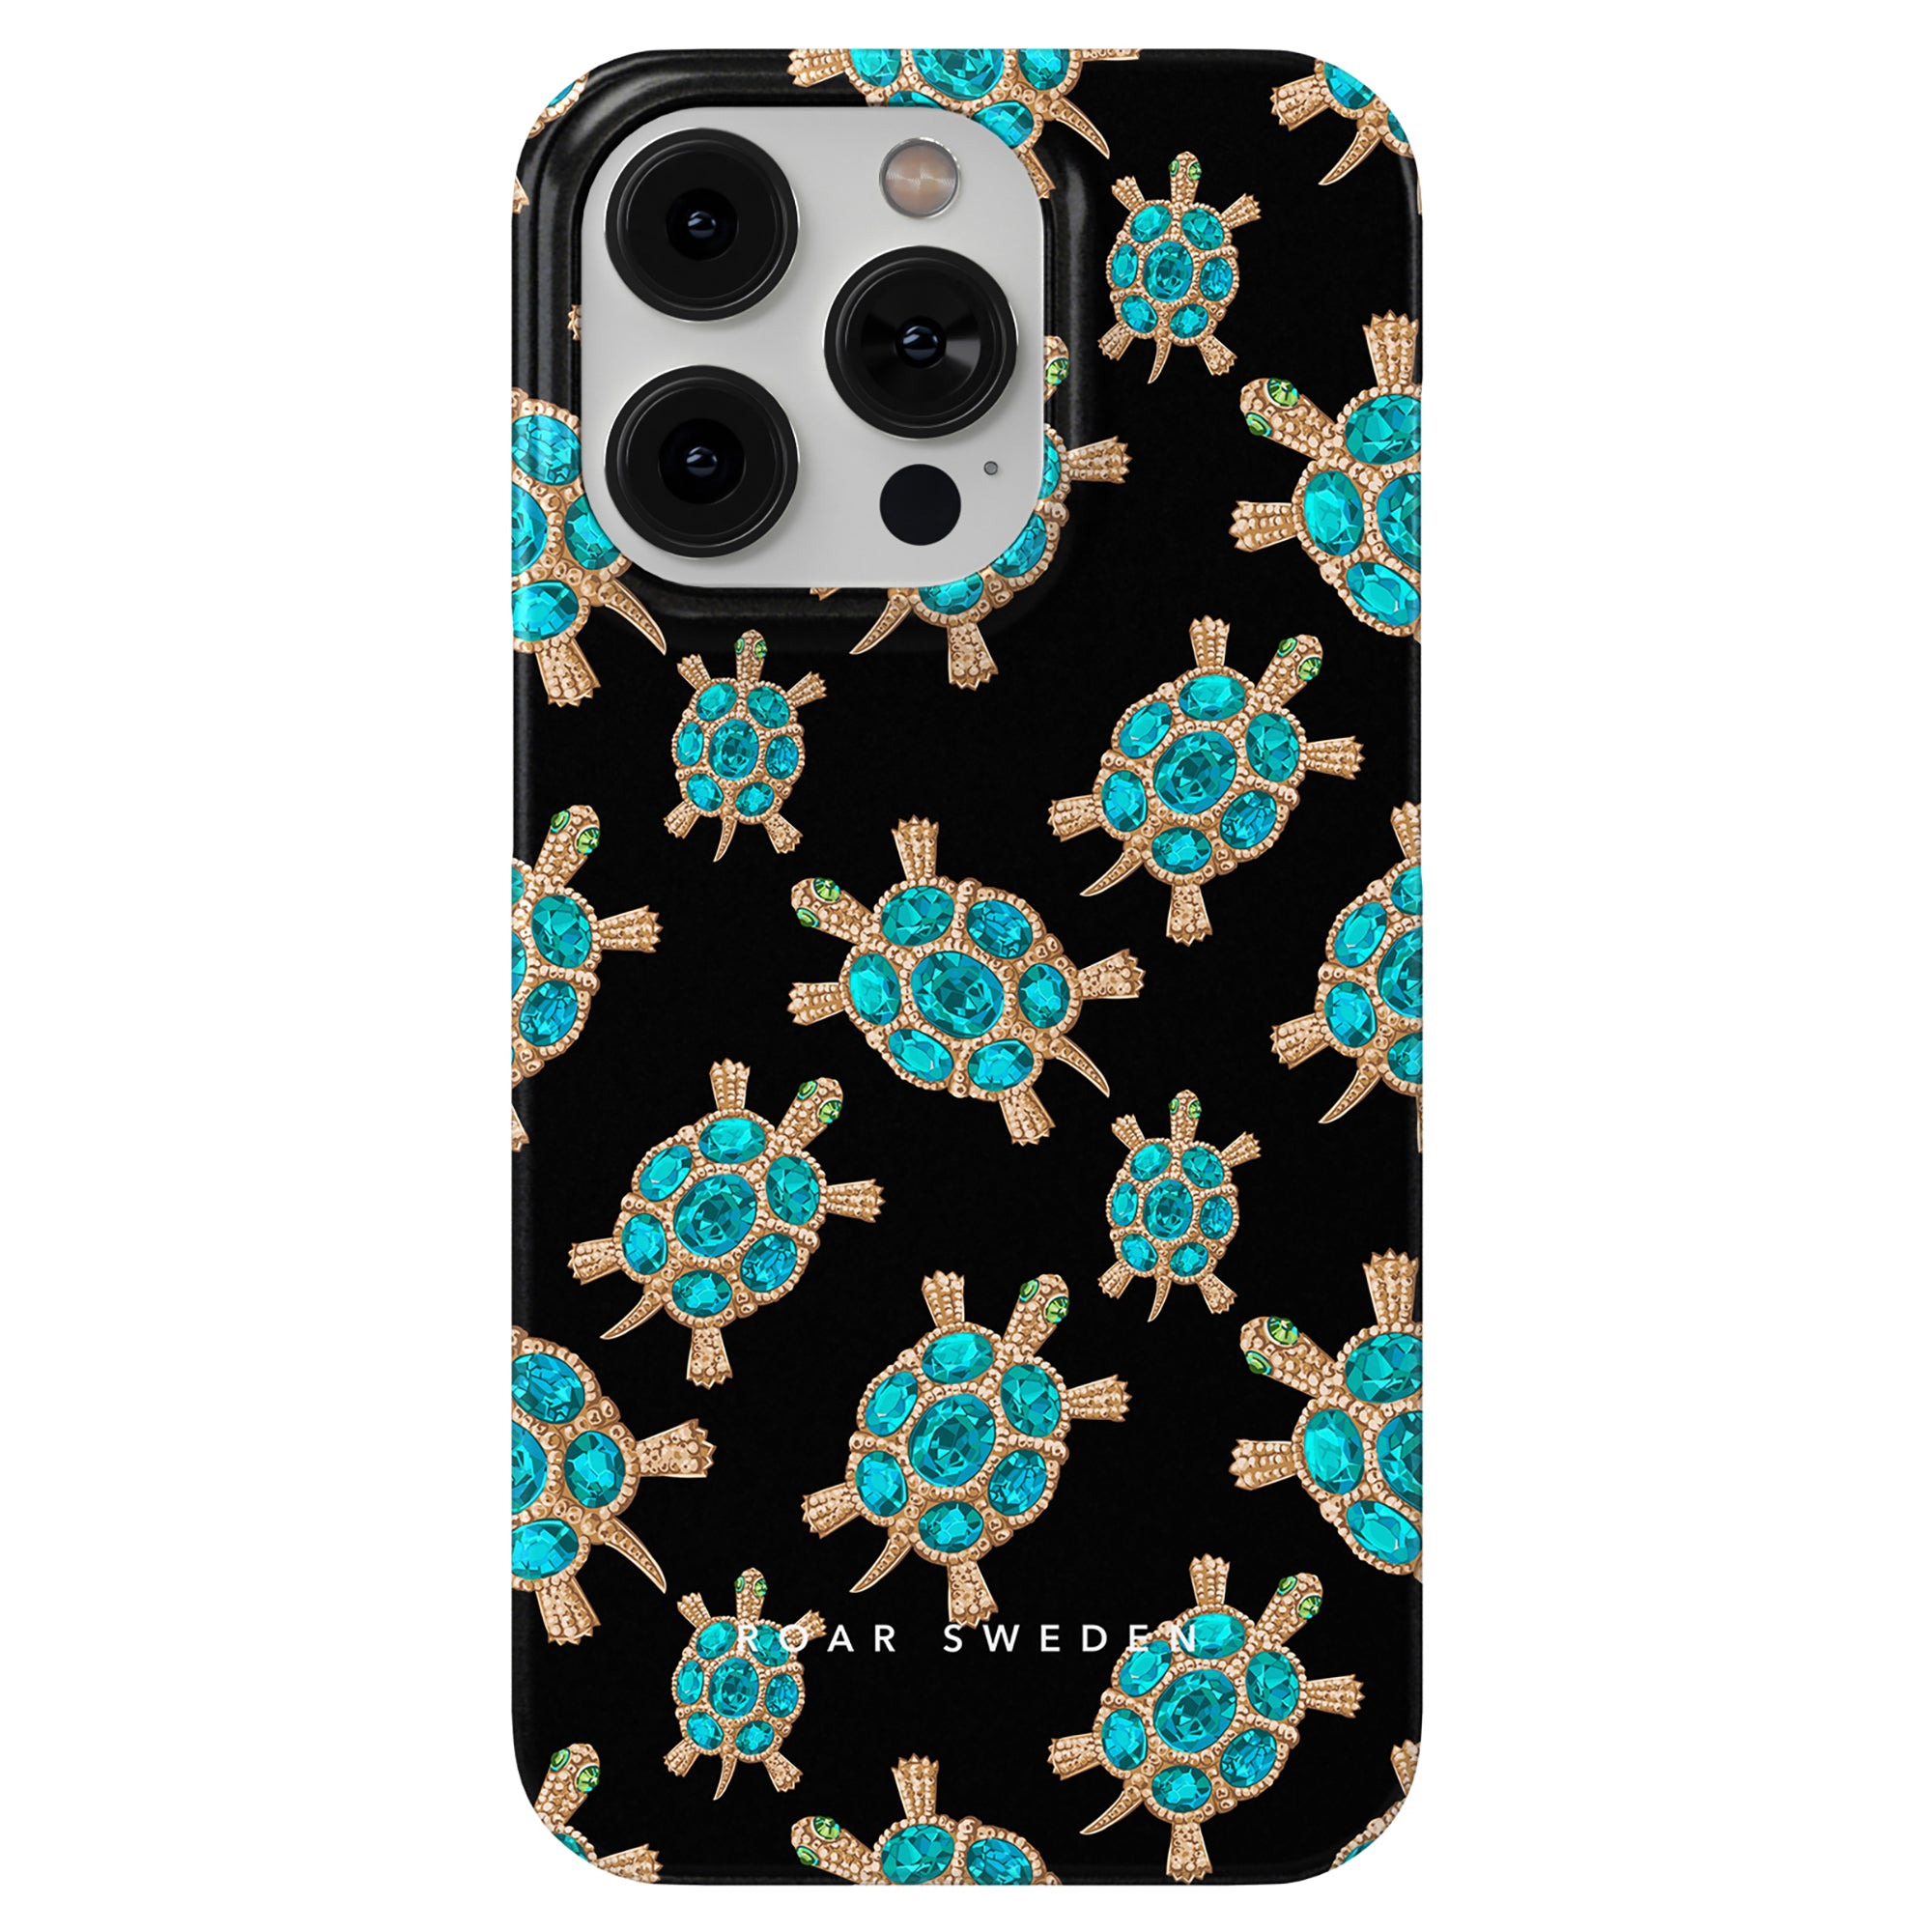 An elegant black Diamond Turtle - Slim case with turtles on it, perfect for any smartphone accessory.